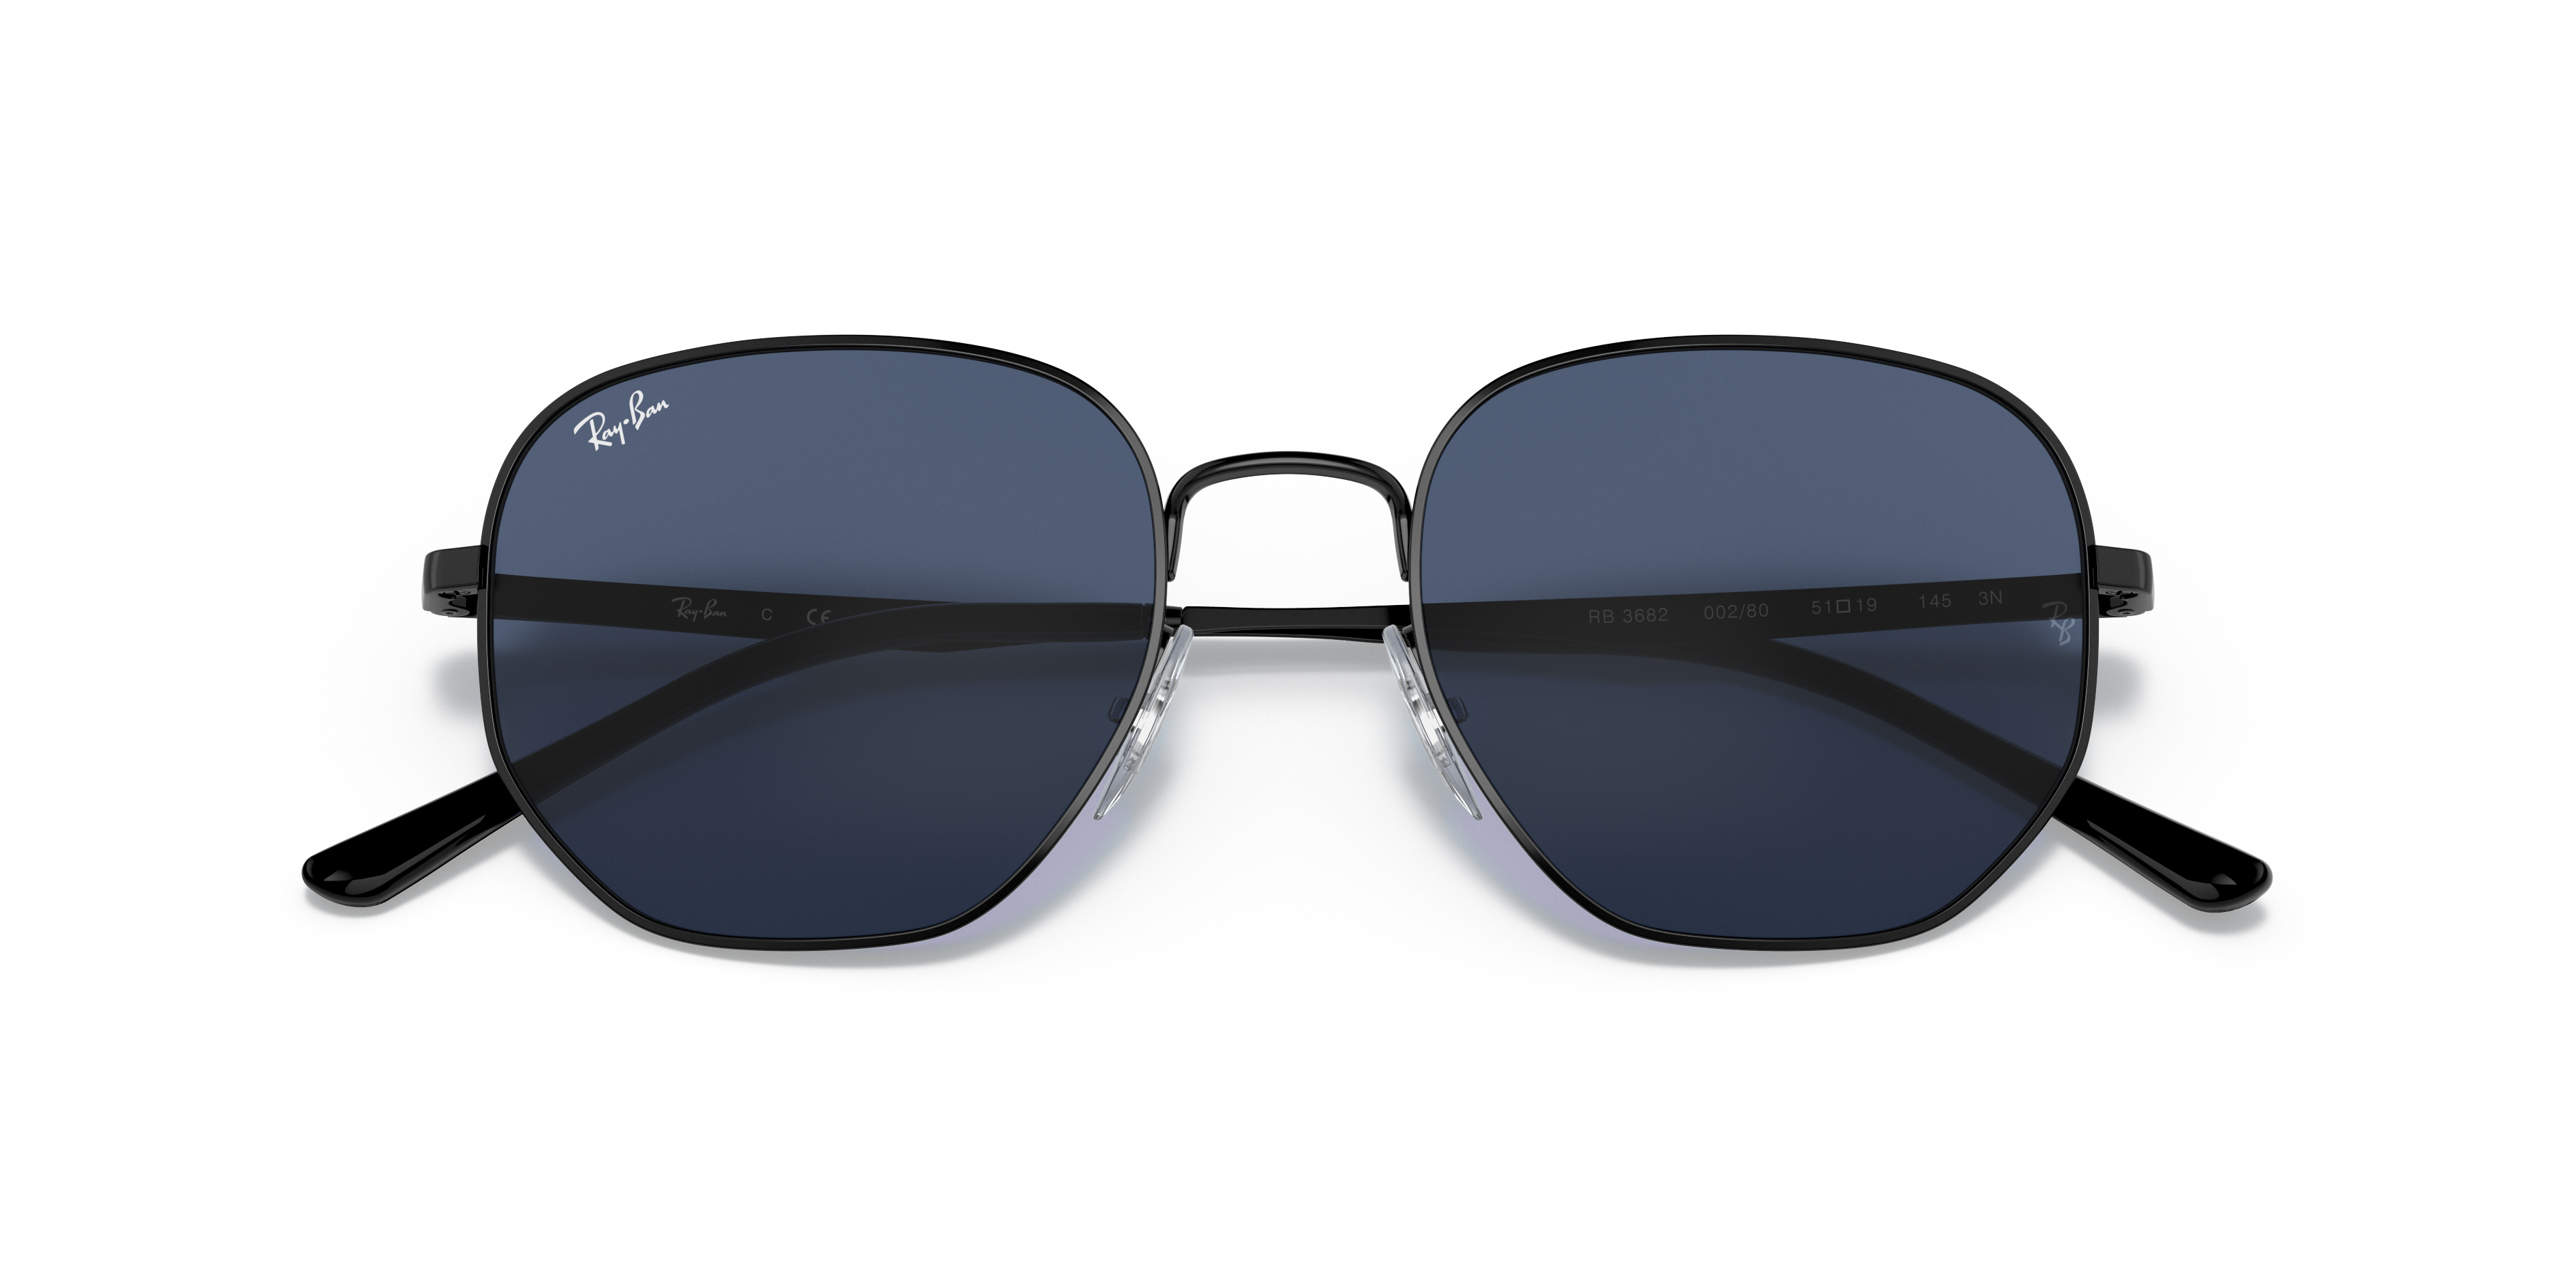 Rb3682 Sunglasses in Black and Dark Blue | Ray-Ban®